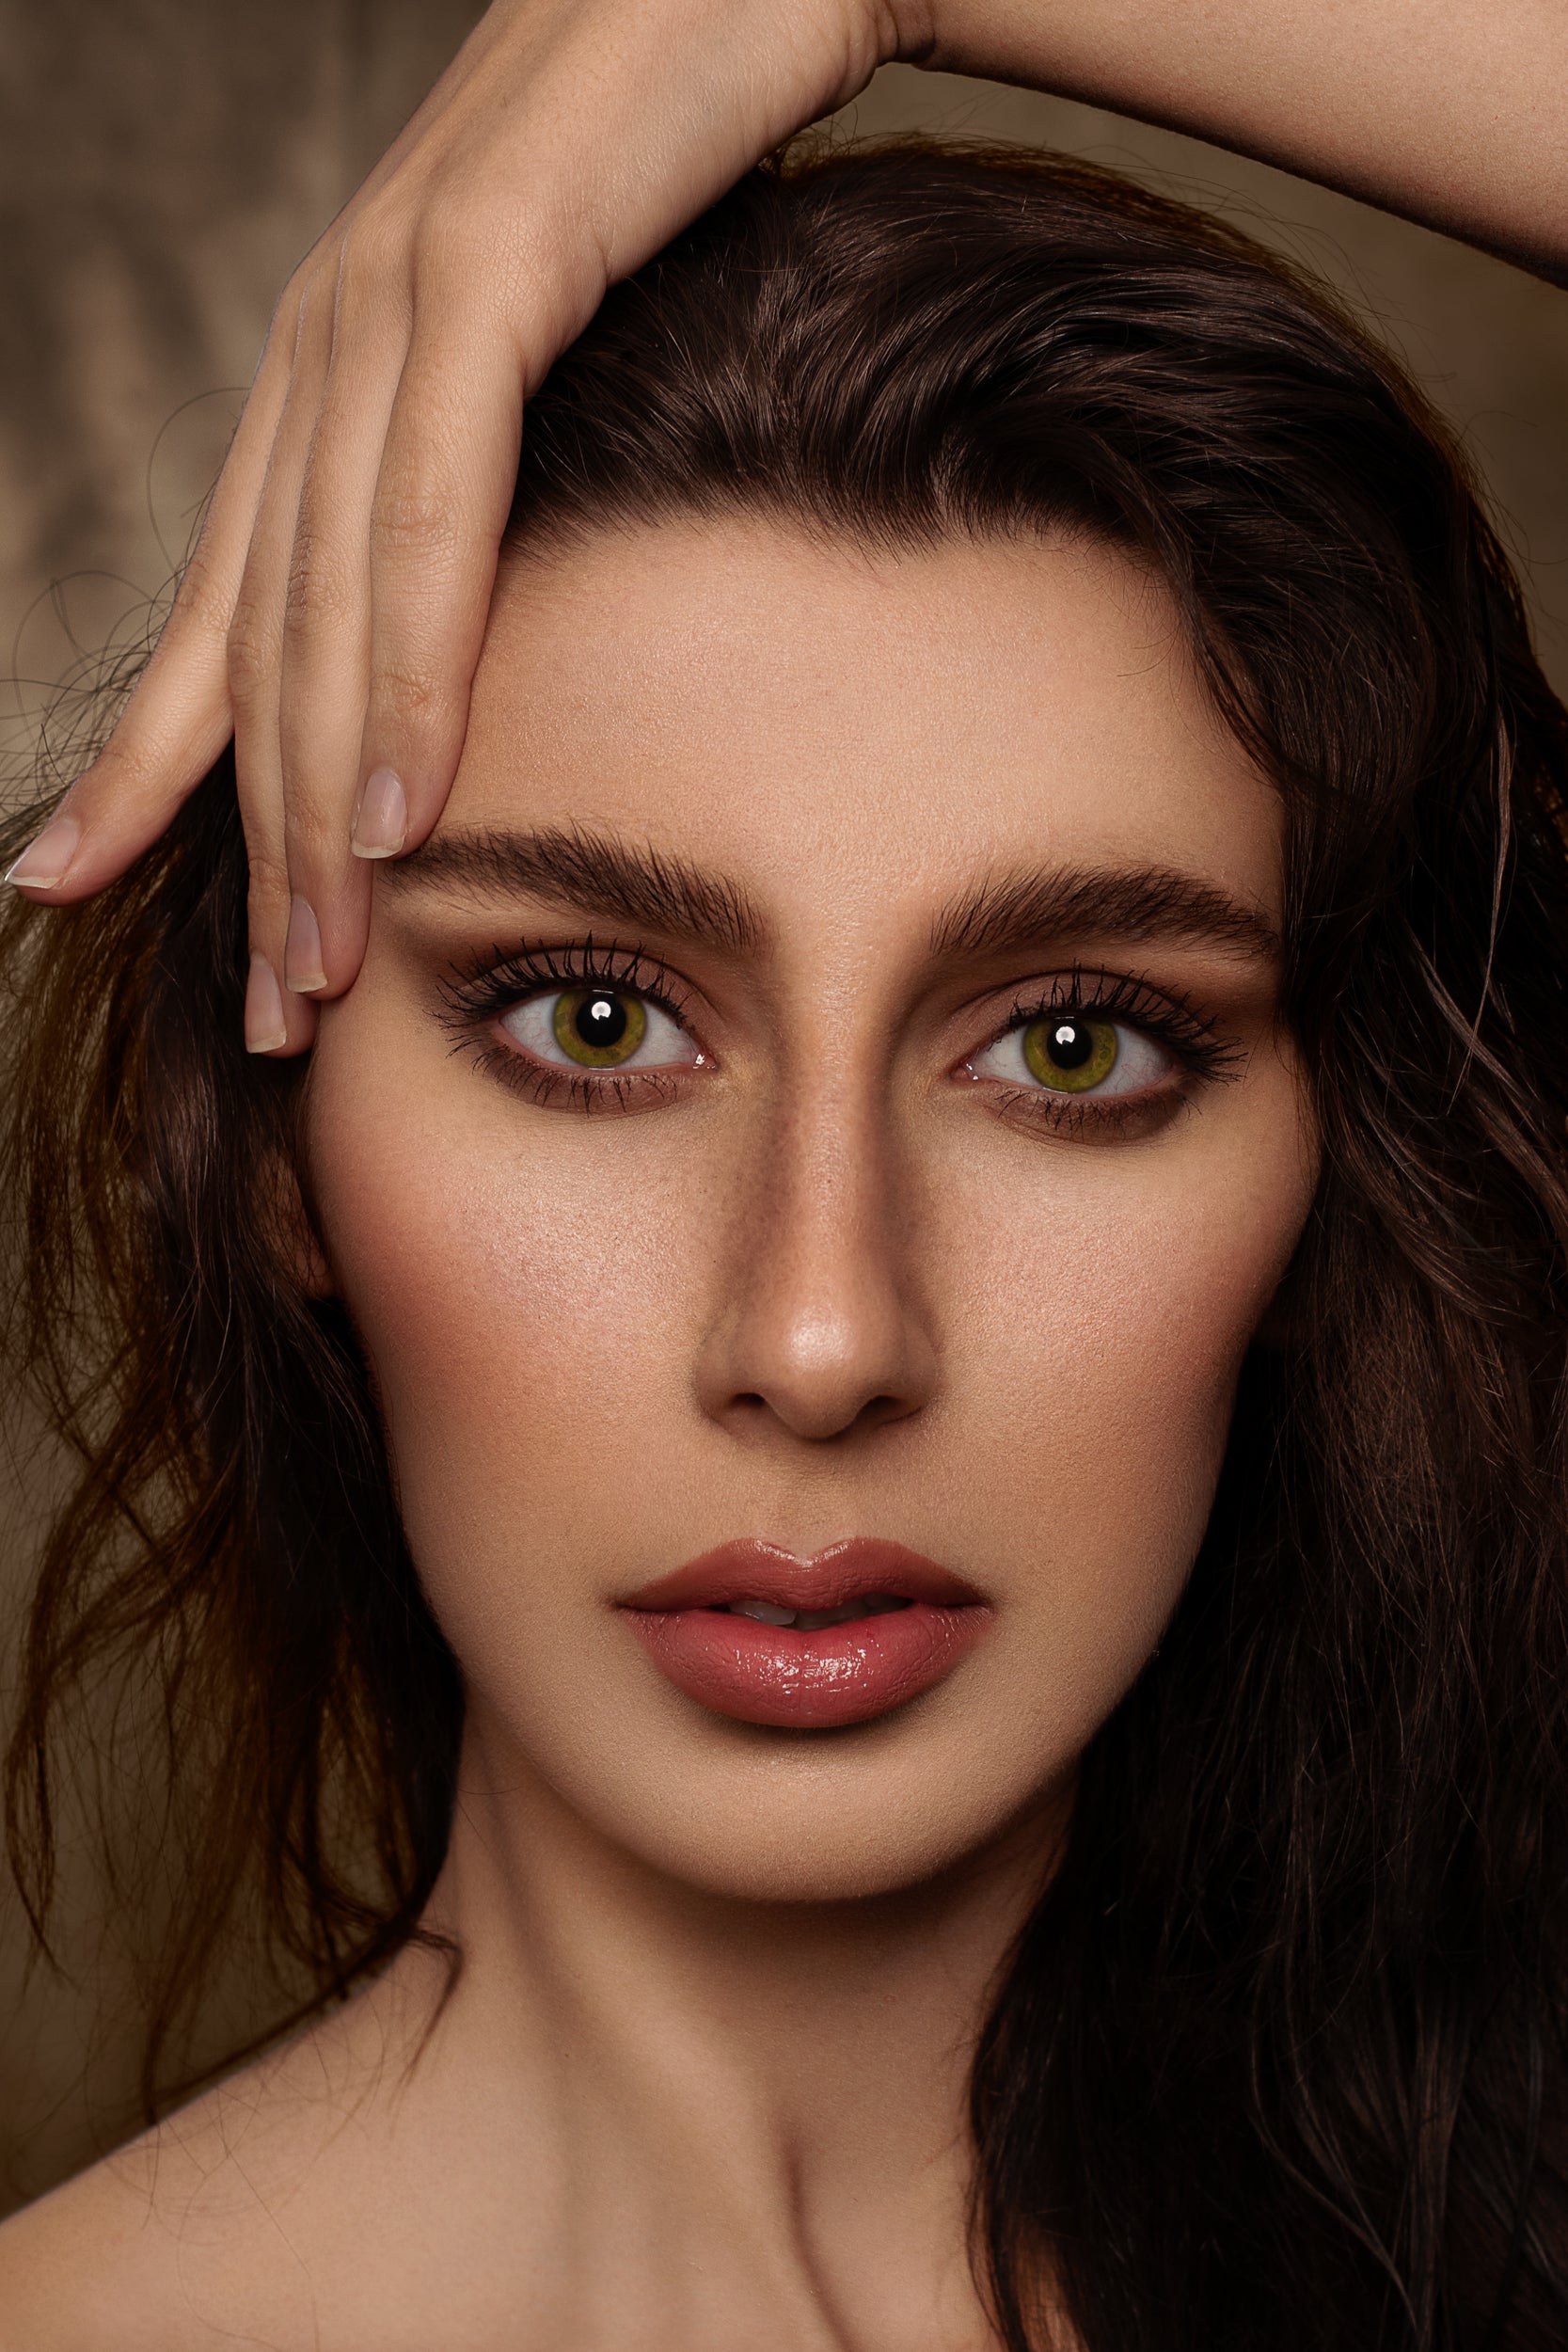 Close-up portrait of a woman with intense green eyes, glossy lips, and wavy brown hair using Kate Sweep Green Abstract Backdrop for Photography, her hand gracefully touching her forehead. Her expression is captivating and serene.